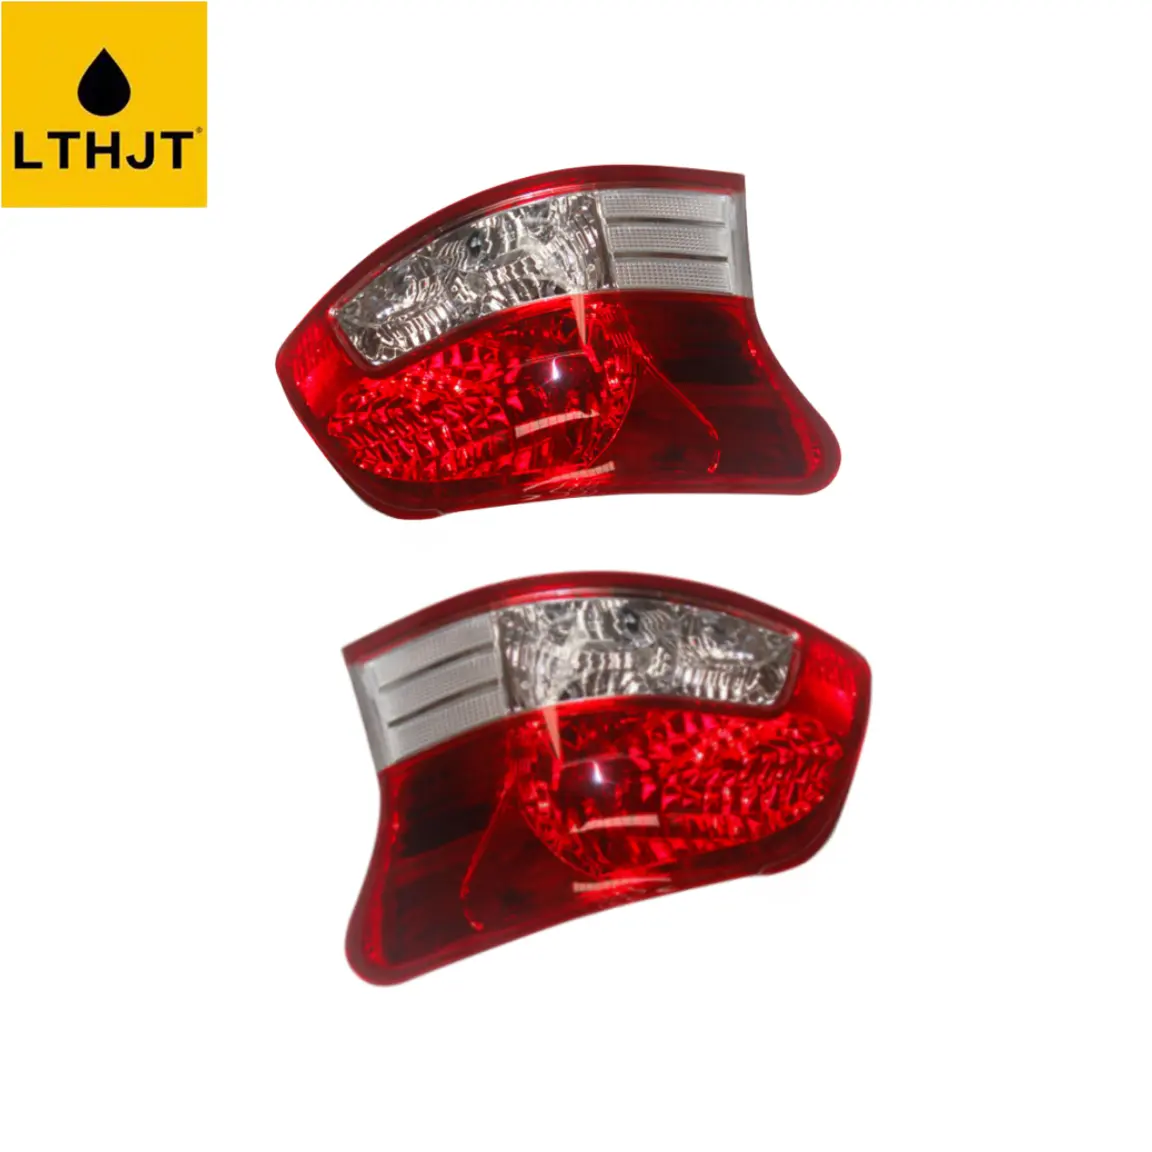 Auto Parts Tail Light Brake Turn Signal Rear Lights 81561-52560 81551-52610 For Toyota Vios NCP92 2005-2012